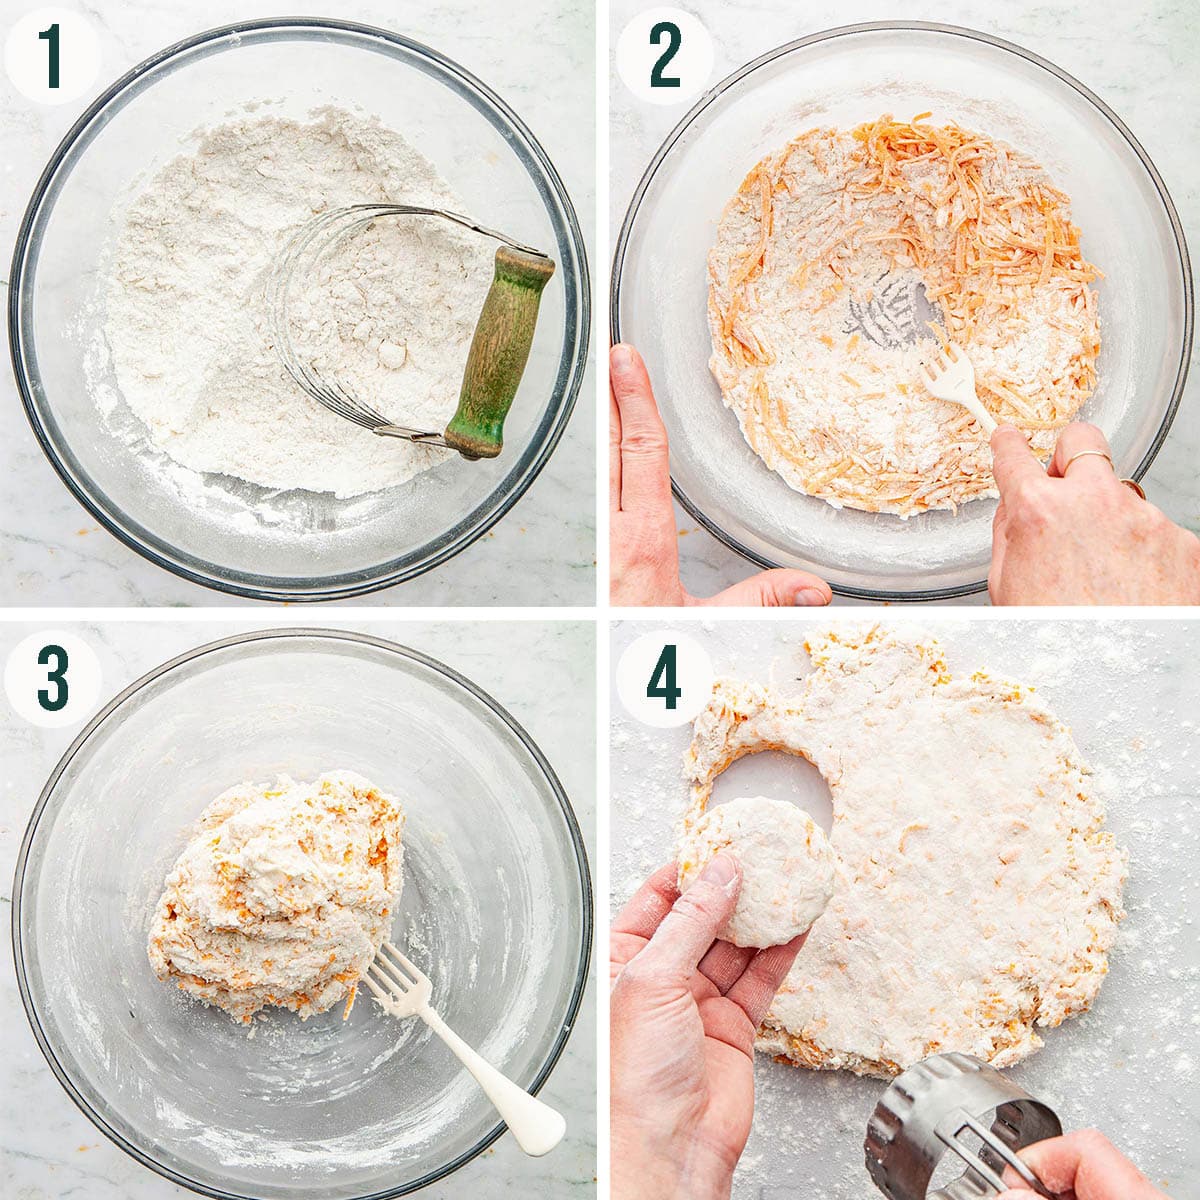 Biscuit dough steps 1 to 4, mixing the dough and cutting into rounds.